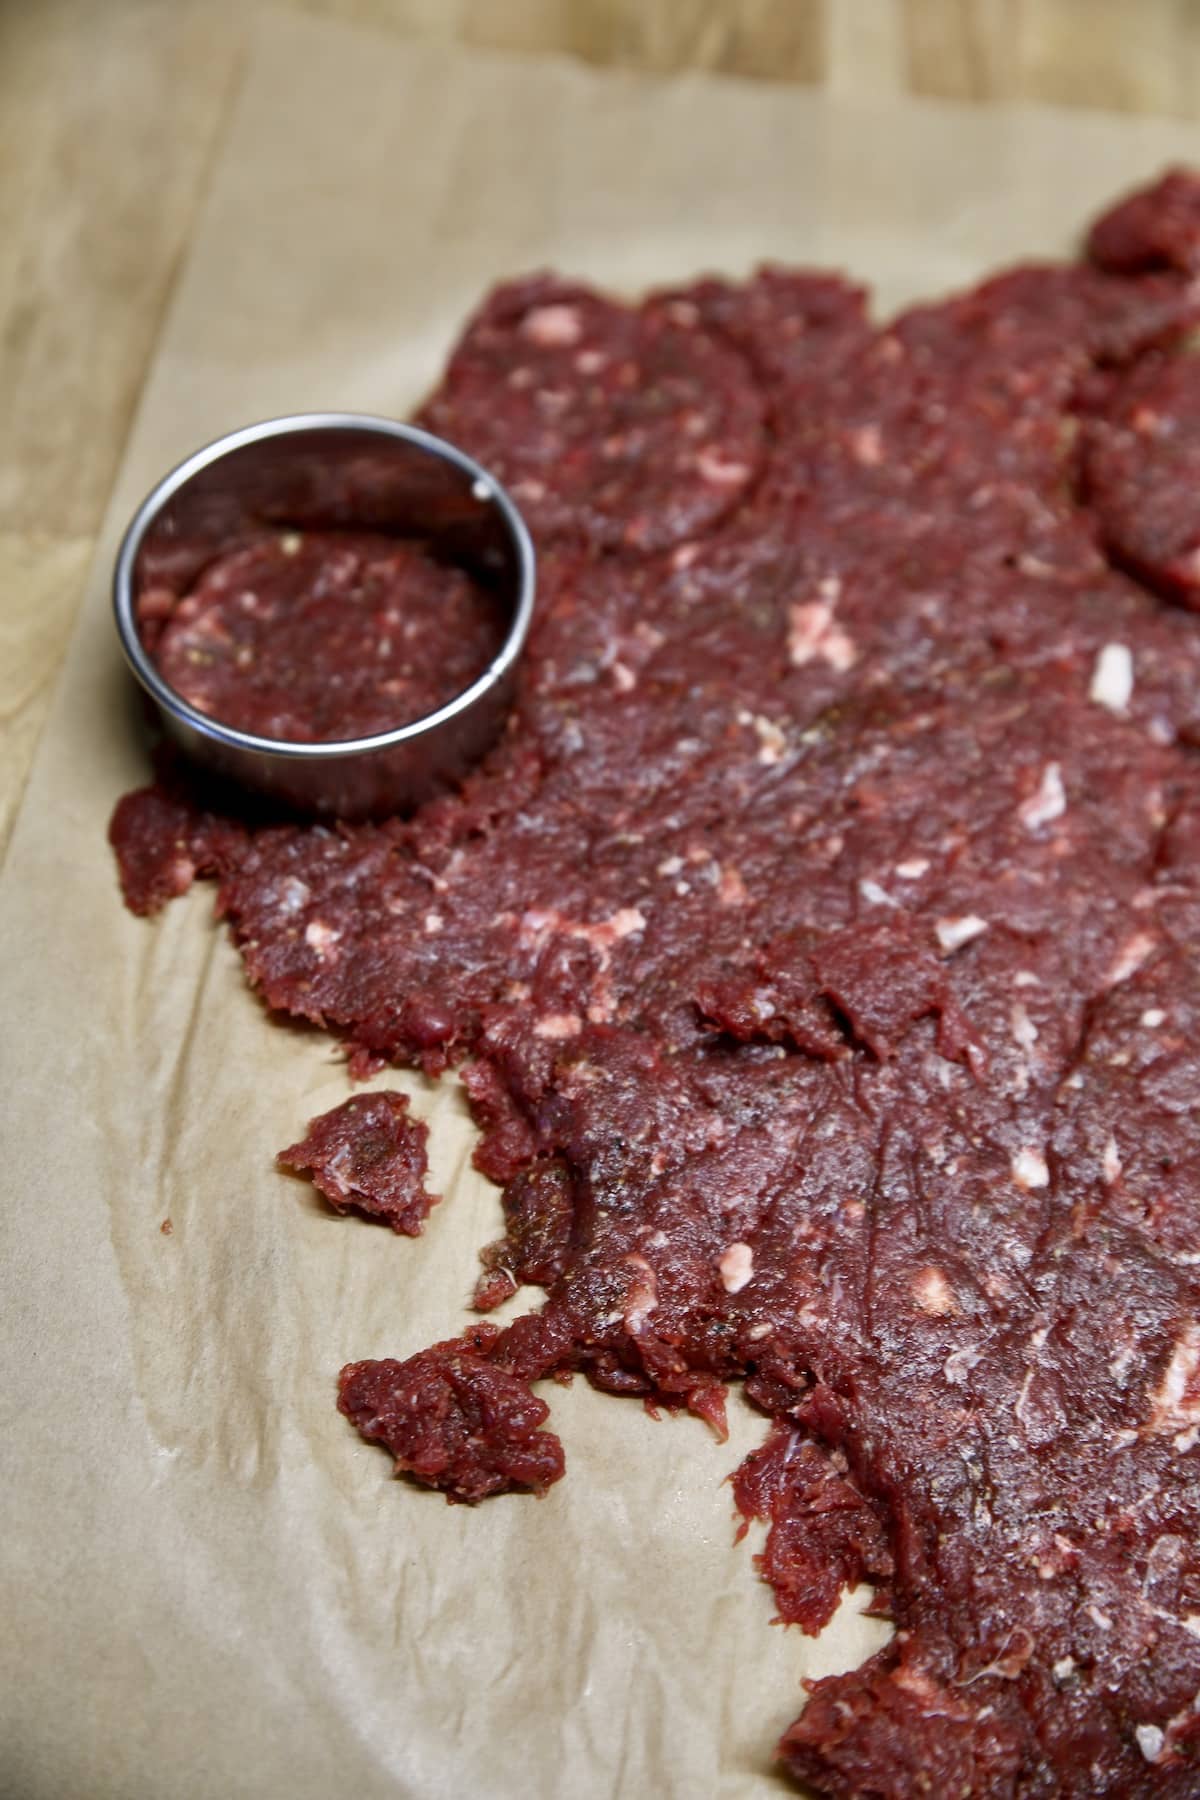 Using a biscuit cutter to cut venison slider burgers.